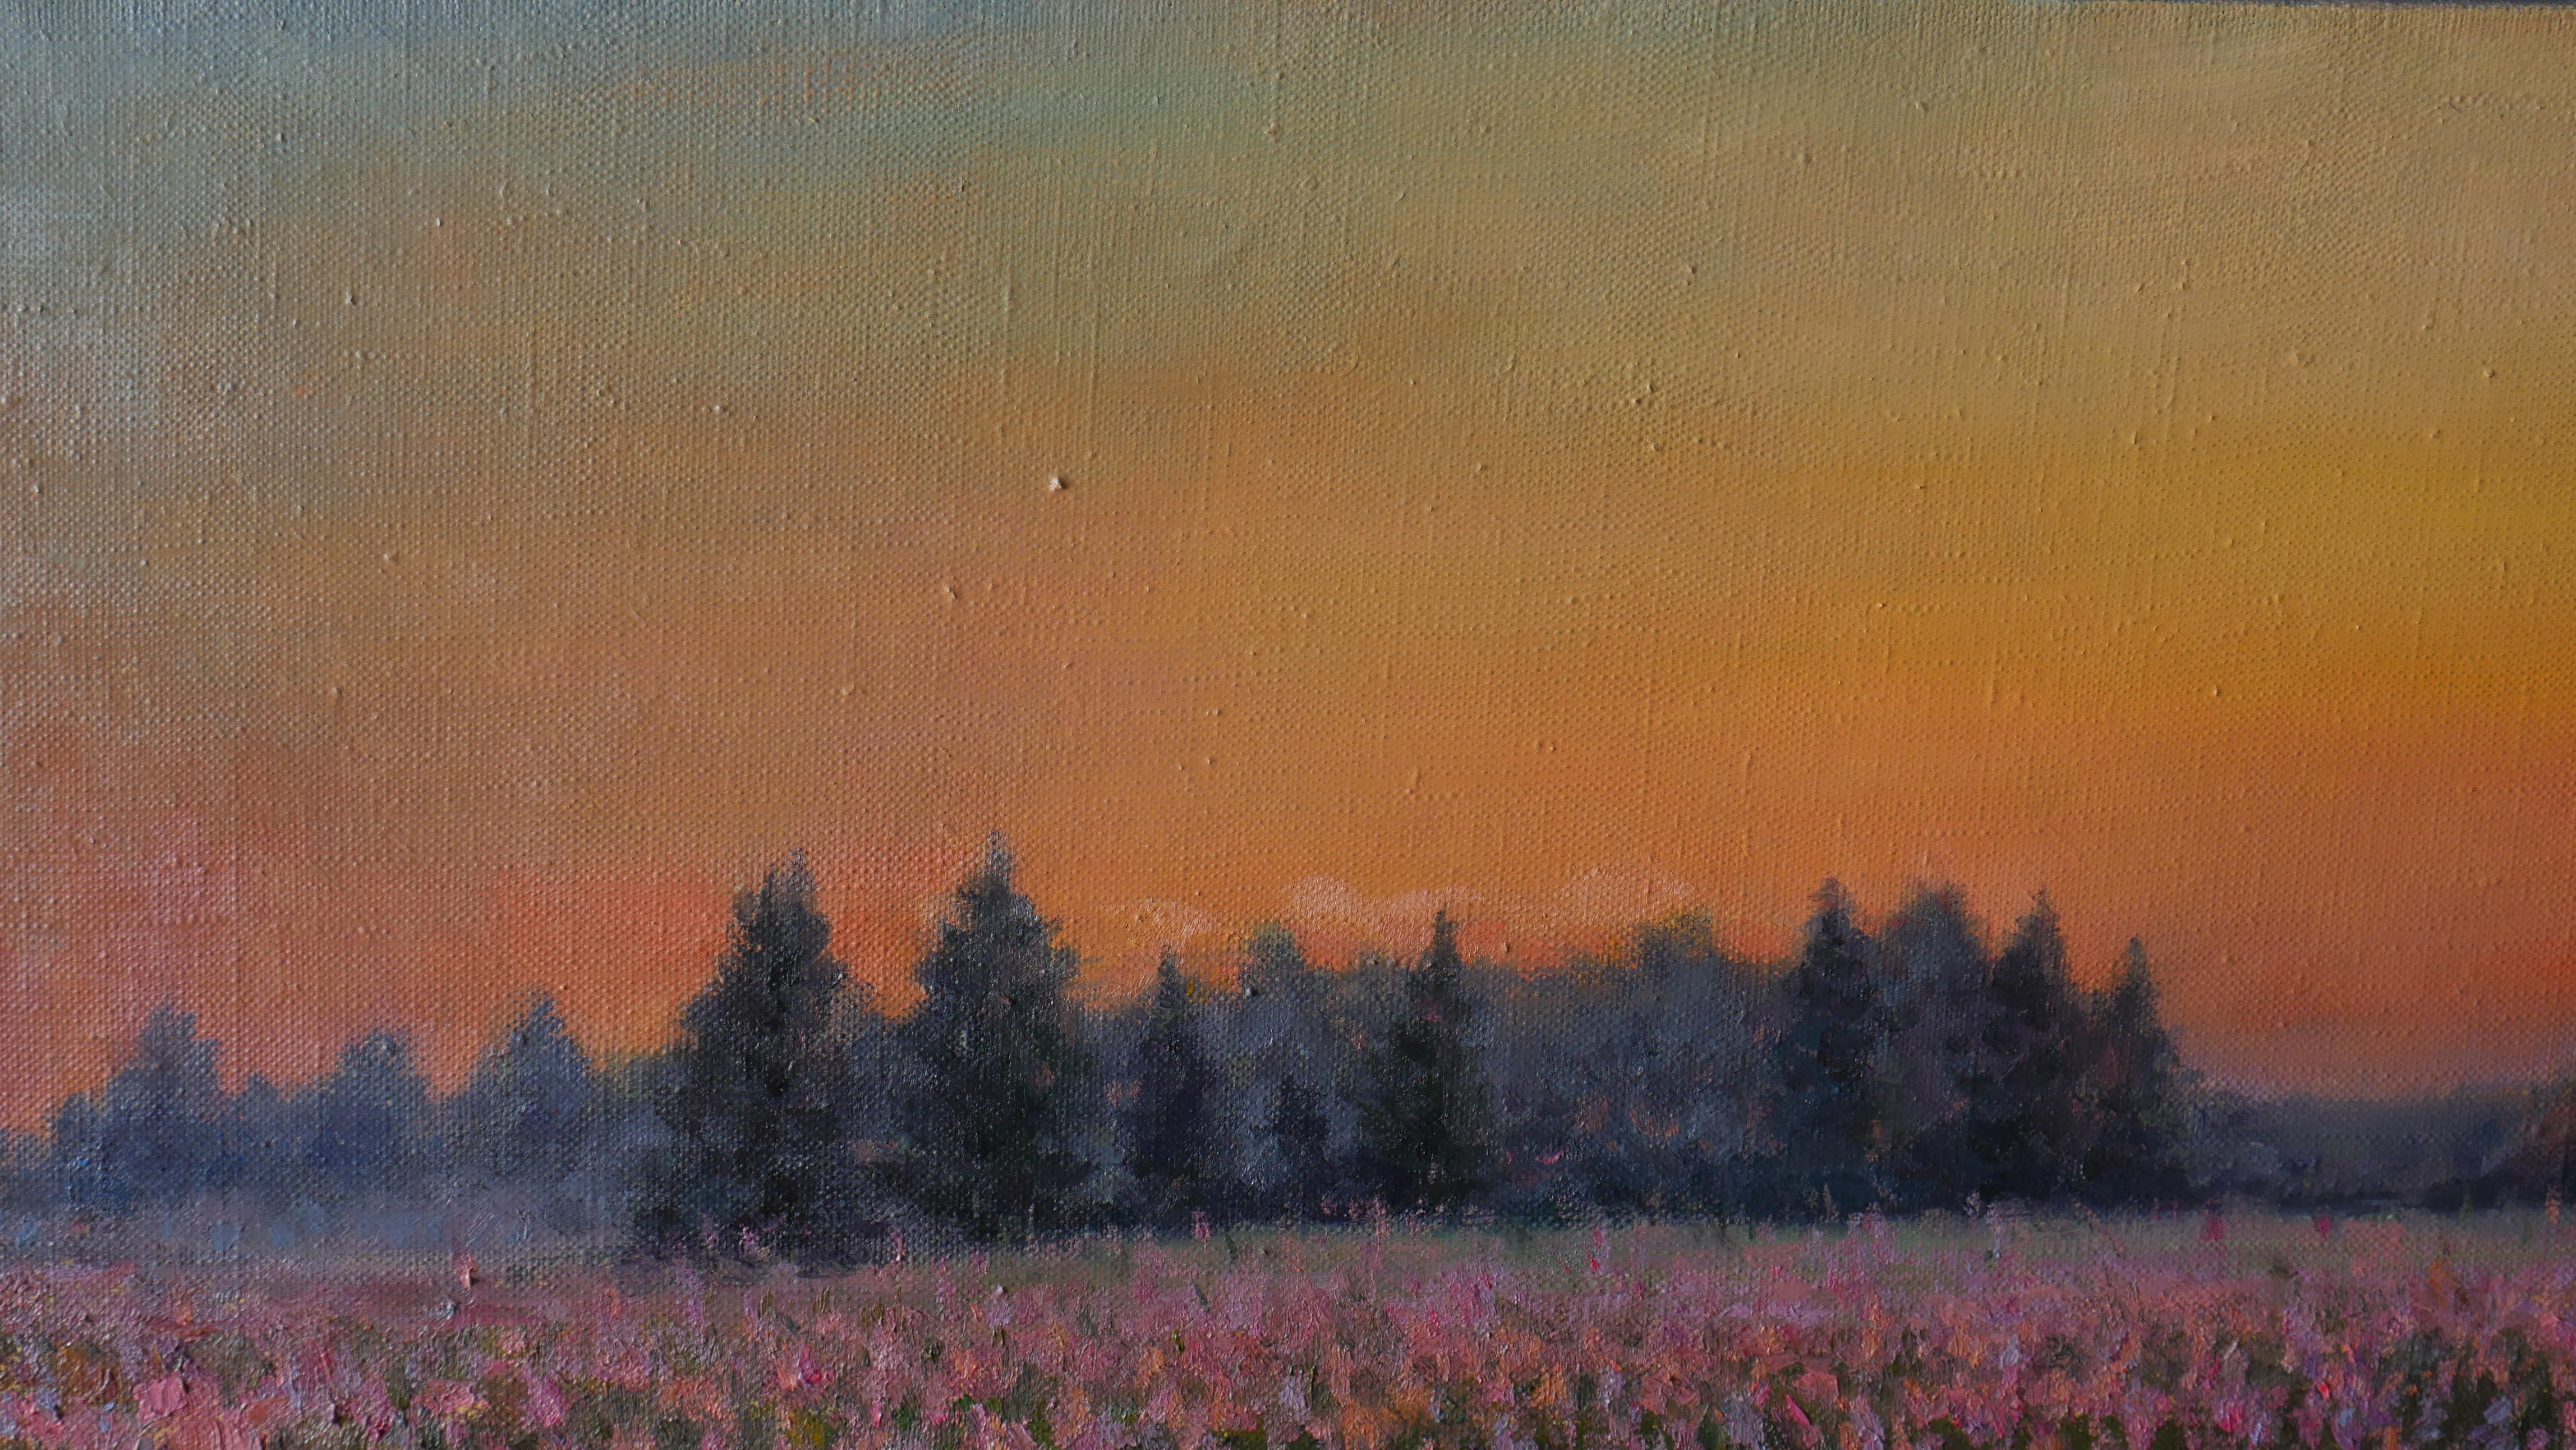 Sunset Above The Fireweed Field - original summer landscape painting For Sale 2